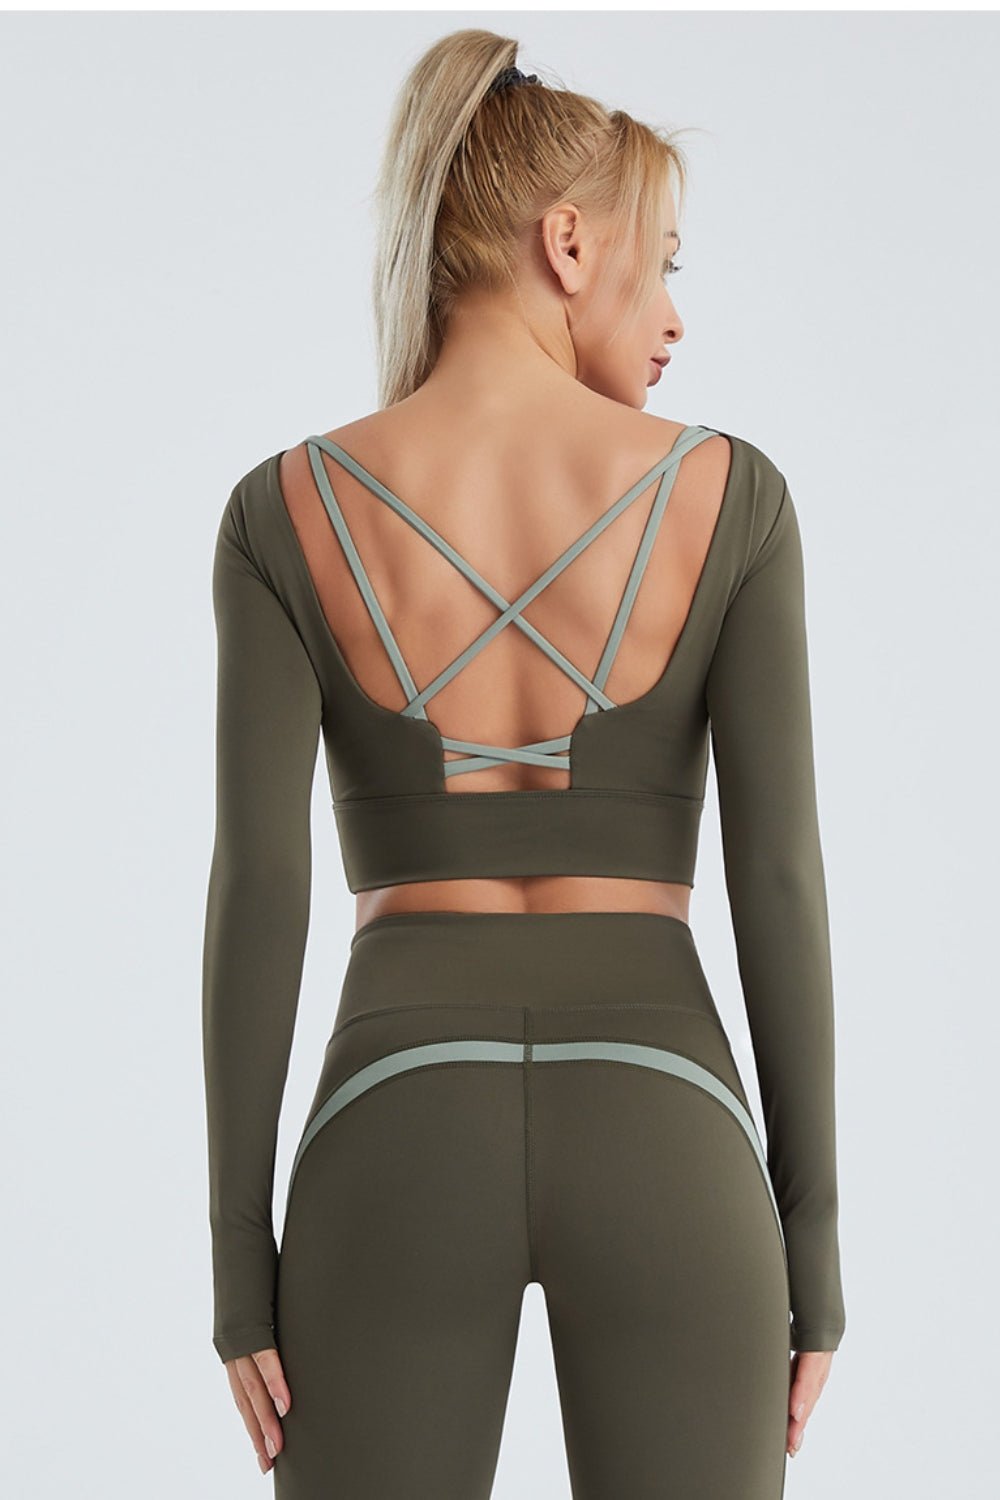 Crisscross Cropped Sports Top - Fashion Girl Online Store